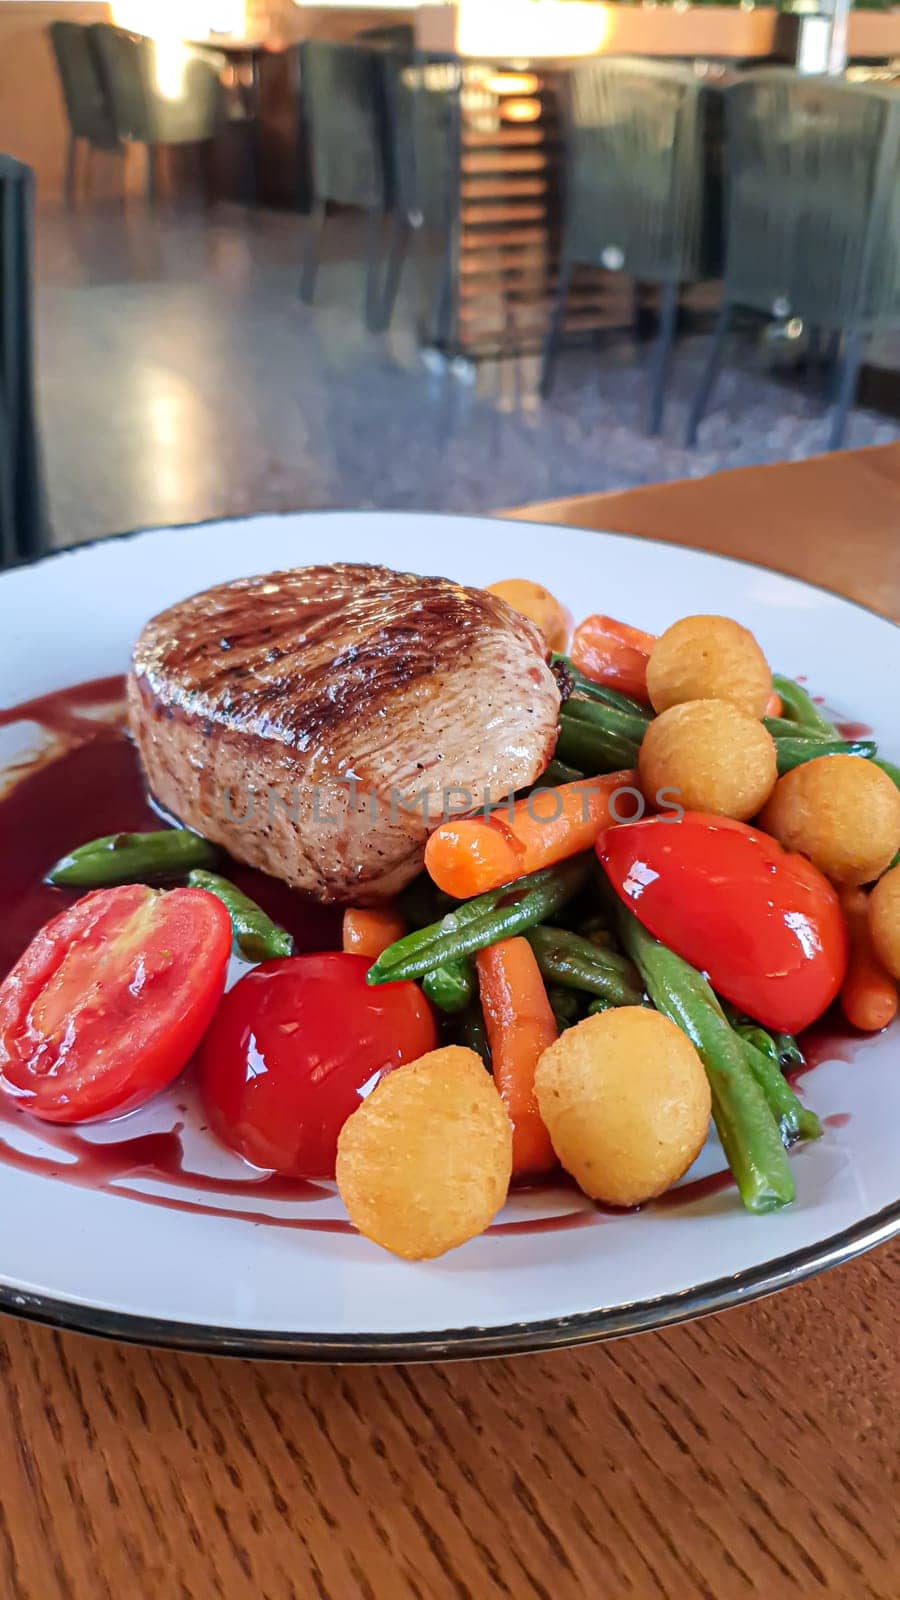 Beef steak with salad. Potato balls and various vegetables on a colored plate. Meat restaurant